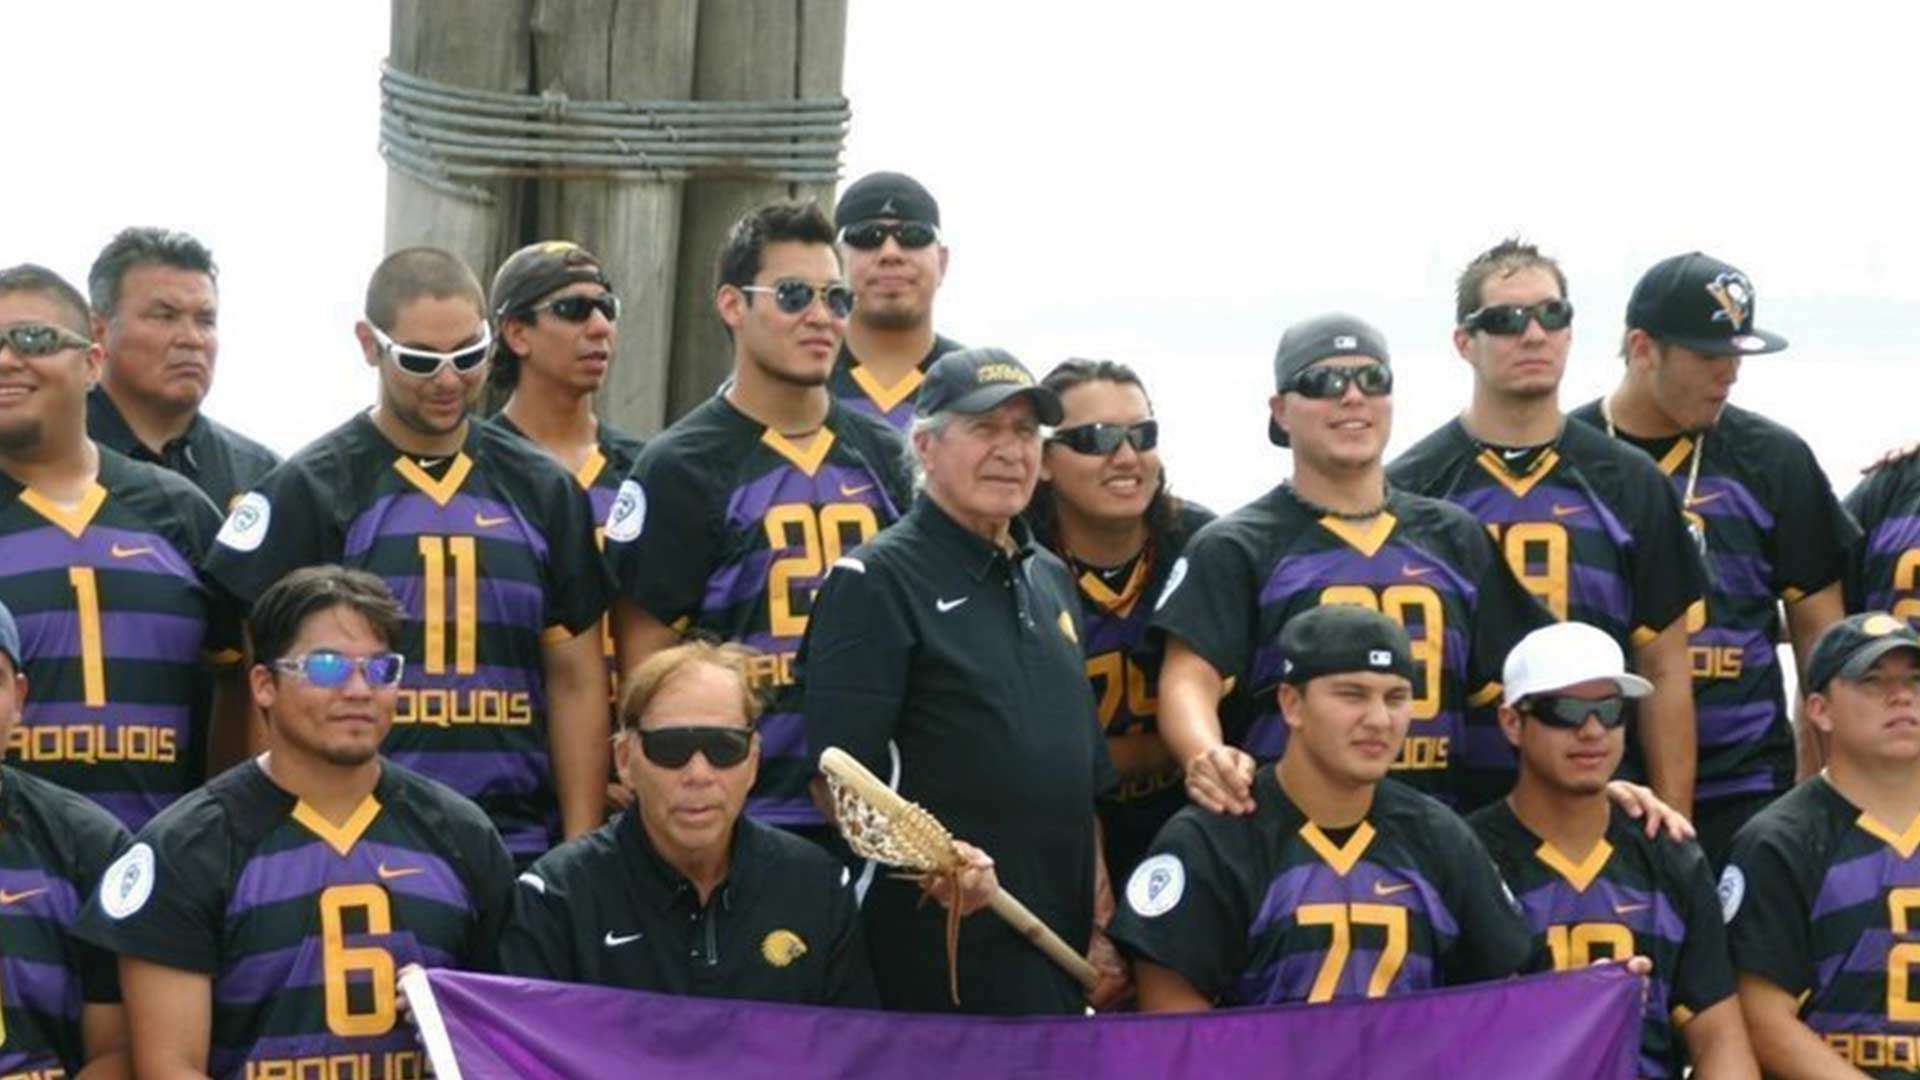 image for Petition calls for boycott of world lacrosse games after Iroquois Nationals excluded